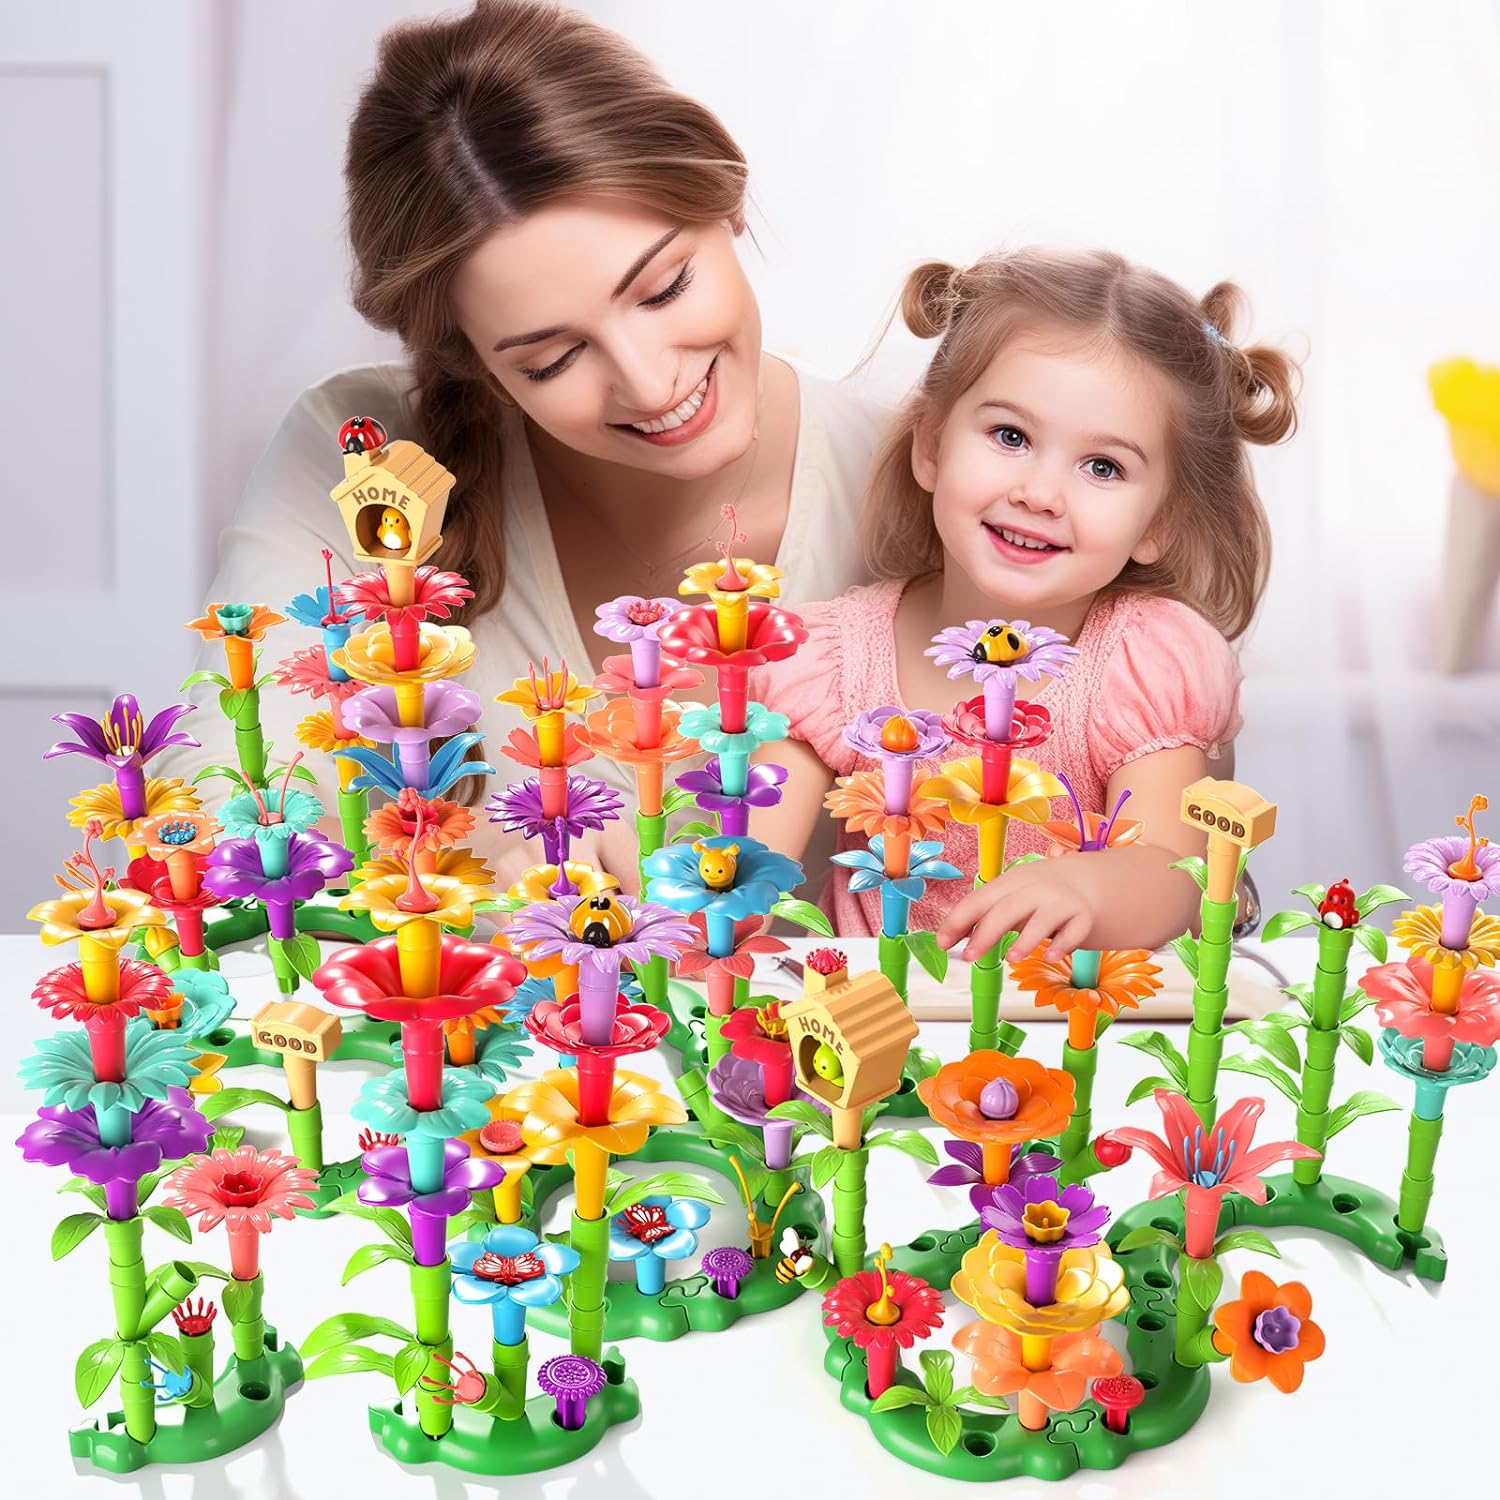 Garbo Star 235PCS Flower Garden Building Toys for Girls, Educational Activity Preschool Birthday Gifts for 2 3 4 5 Year Old Girls, Toddler Building Stem Toys for Kids Toddlers Ages 1-3 3-5